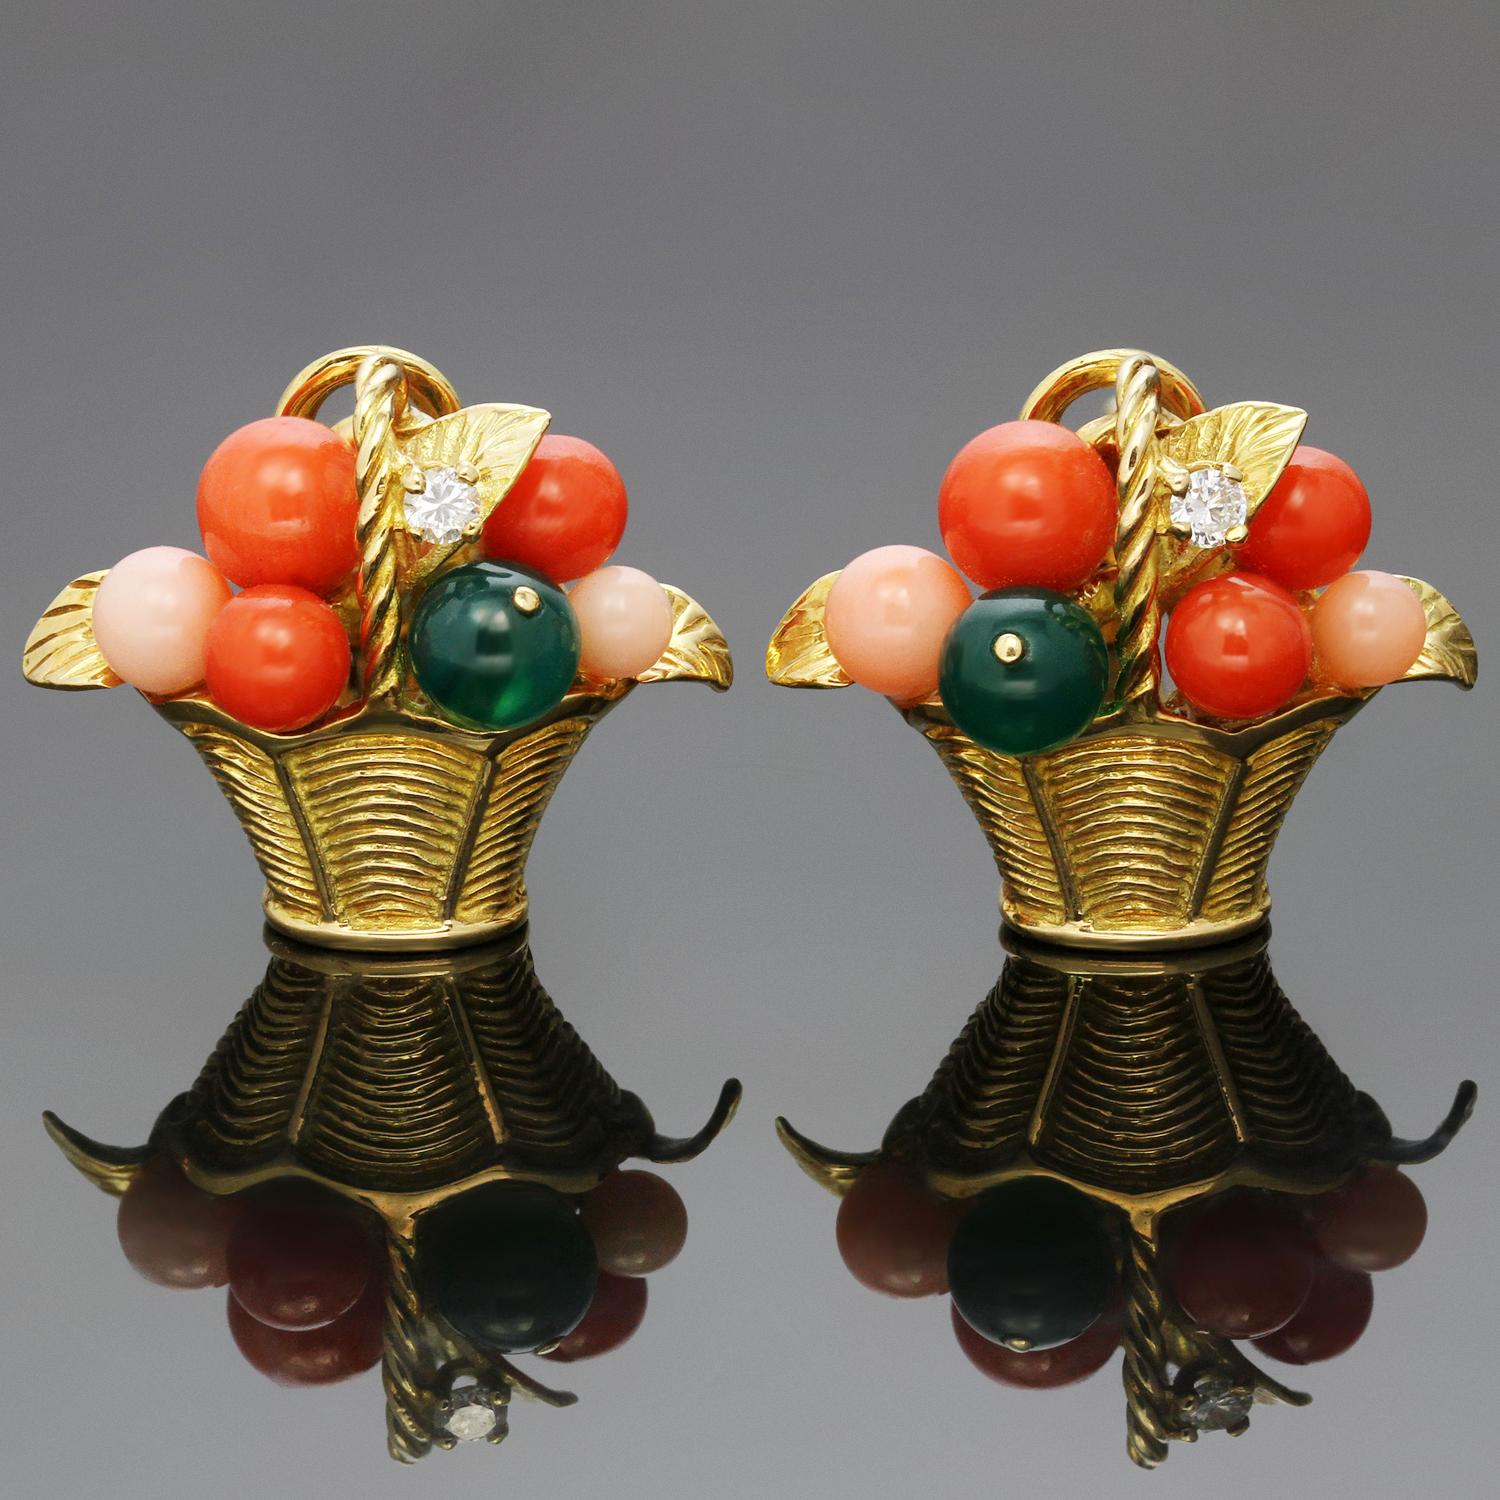 These gorgeous and rare vintage Van Cleef & Arpels earrings feature a vibrant floral basket motif crafted in 18k yellow gold and set with bouquet of colorful beads and  brilliant-cut round diamonds of an estimated 0.12 carats. The corals beads